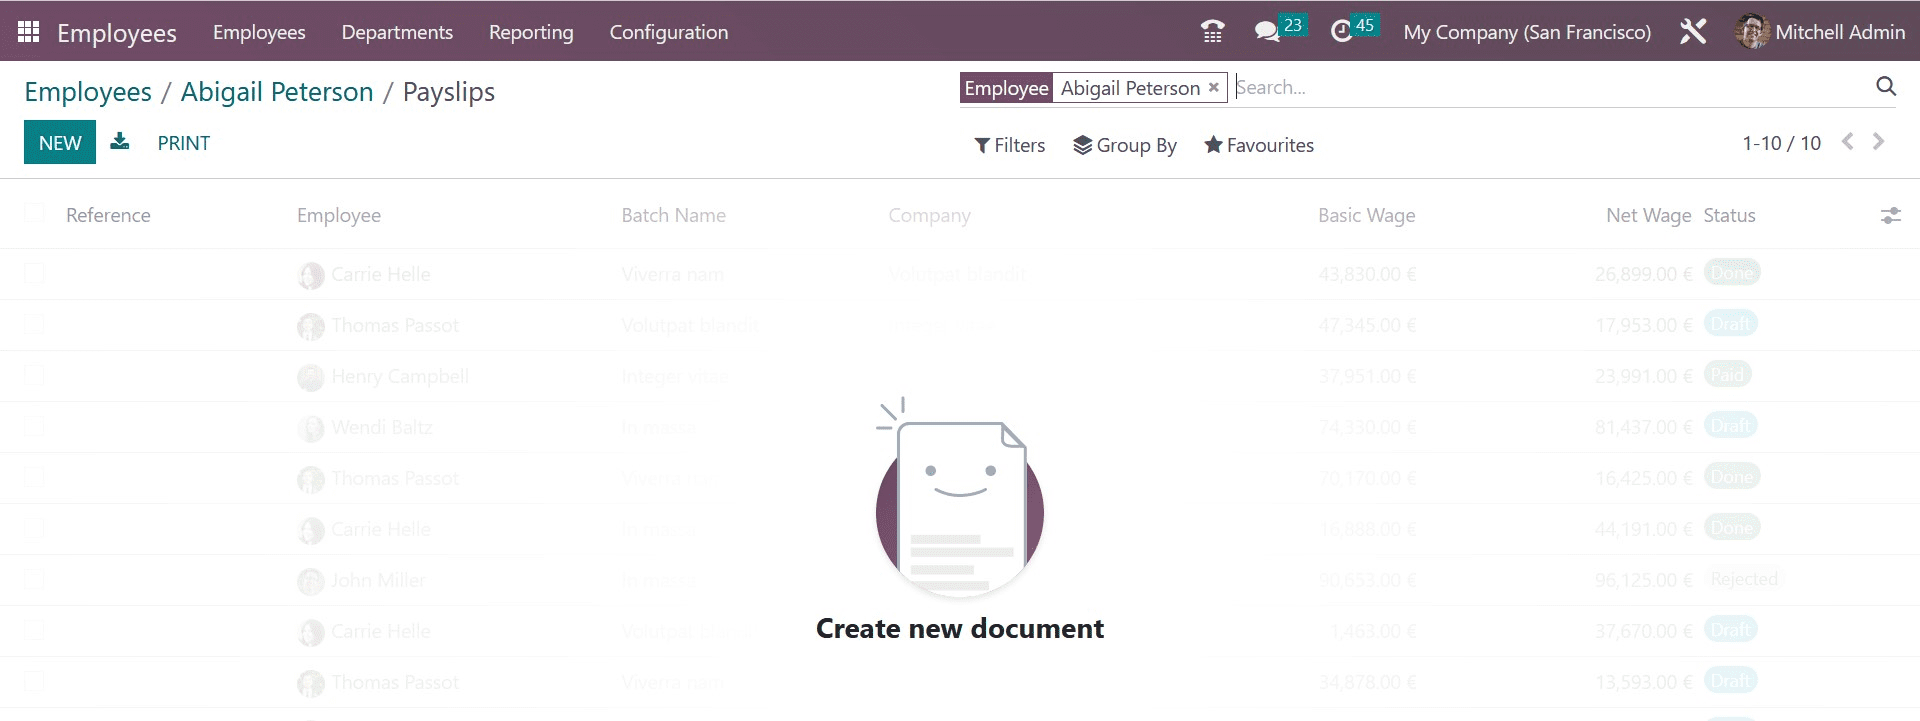 bhow-to-configure-employees-in-odoo-16-employee-management-22-cybrosys